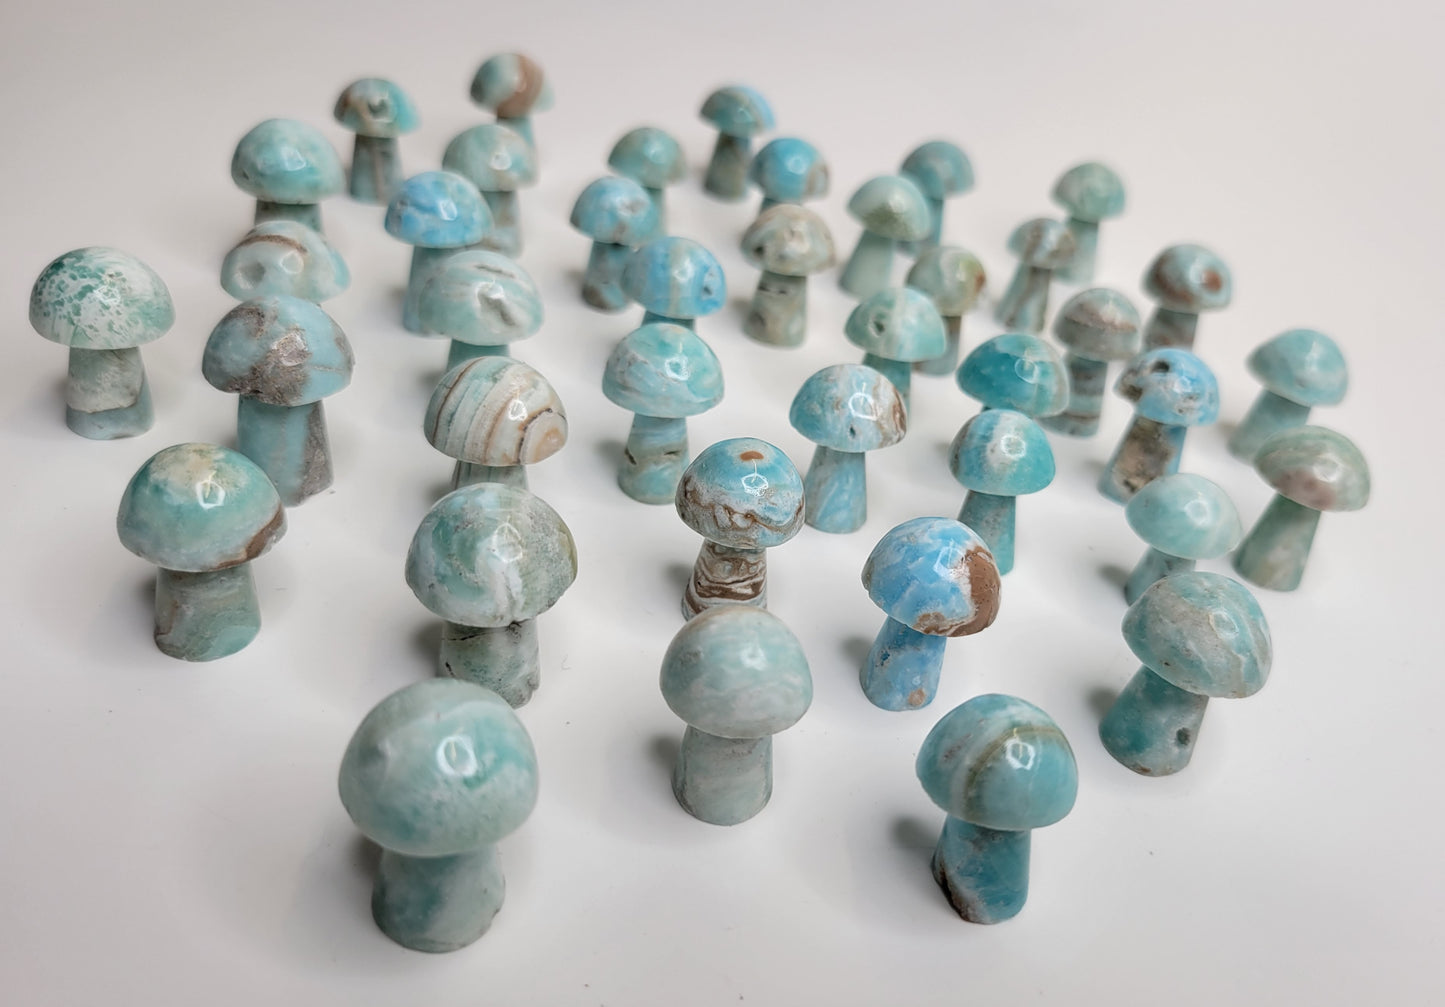 Mushroom Miniature Carved and Polished in Pakistan - Blue Aragonite (each approx. 1 inch)